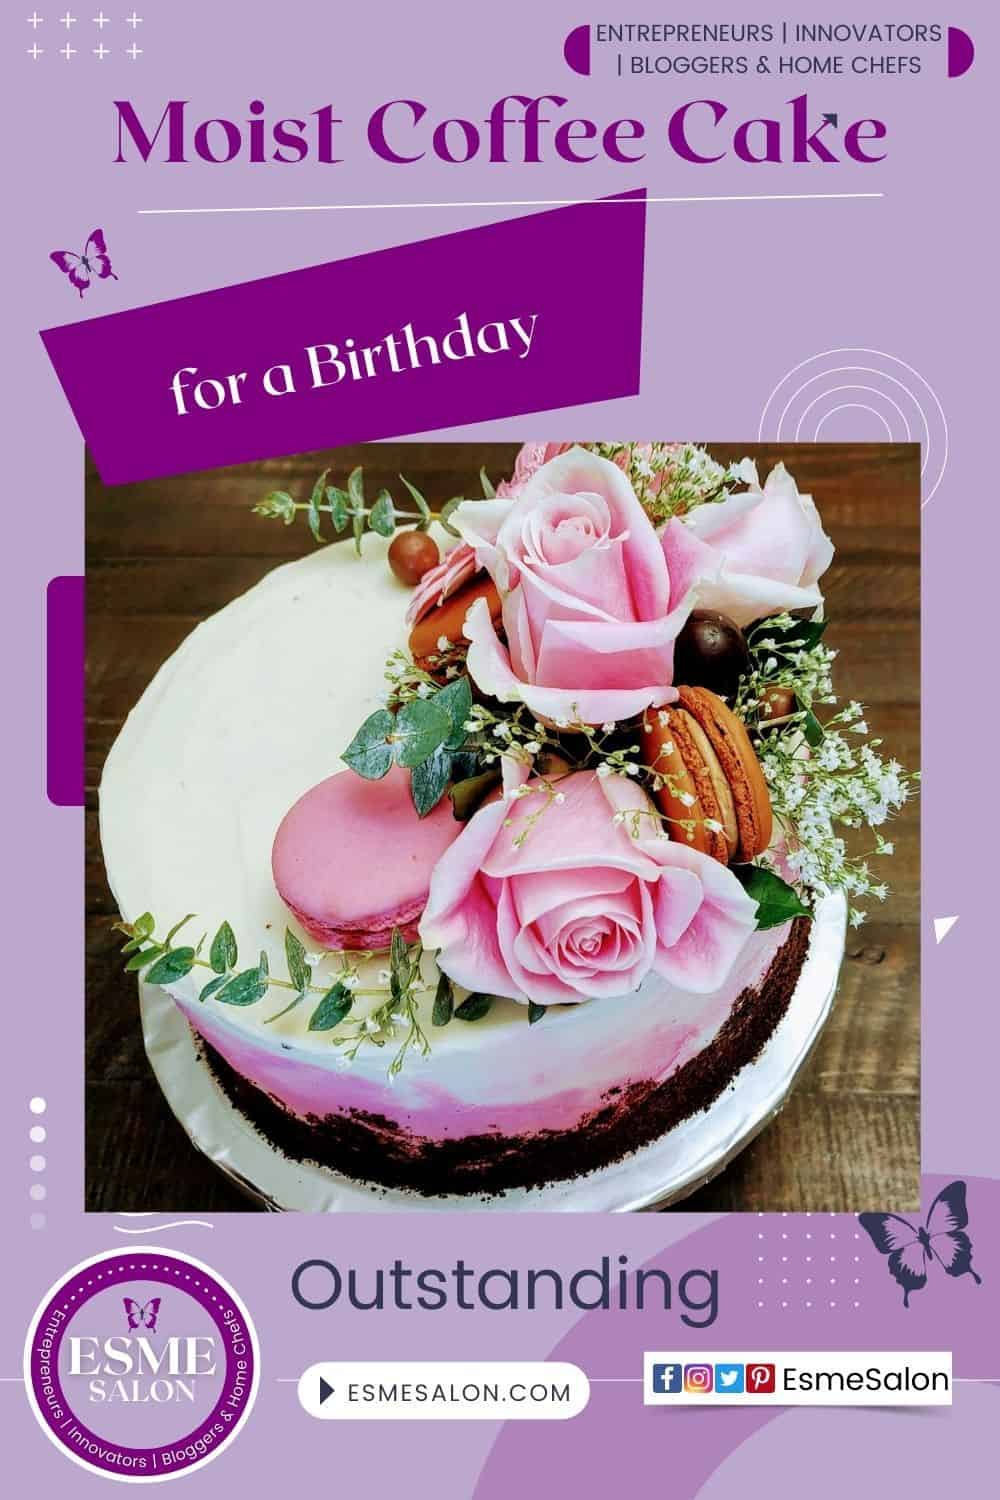 A birthday cake with fresh pink roses, macaroons and chocolate on a white frosting